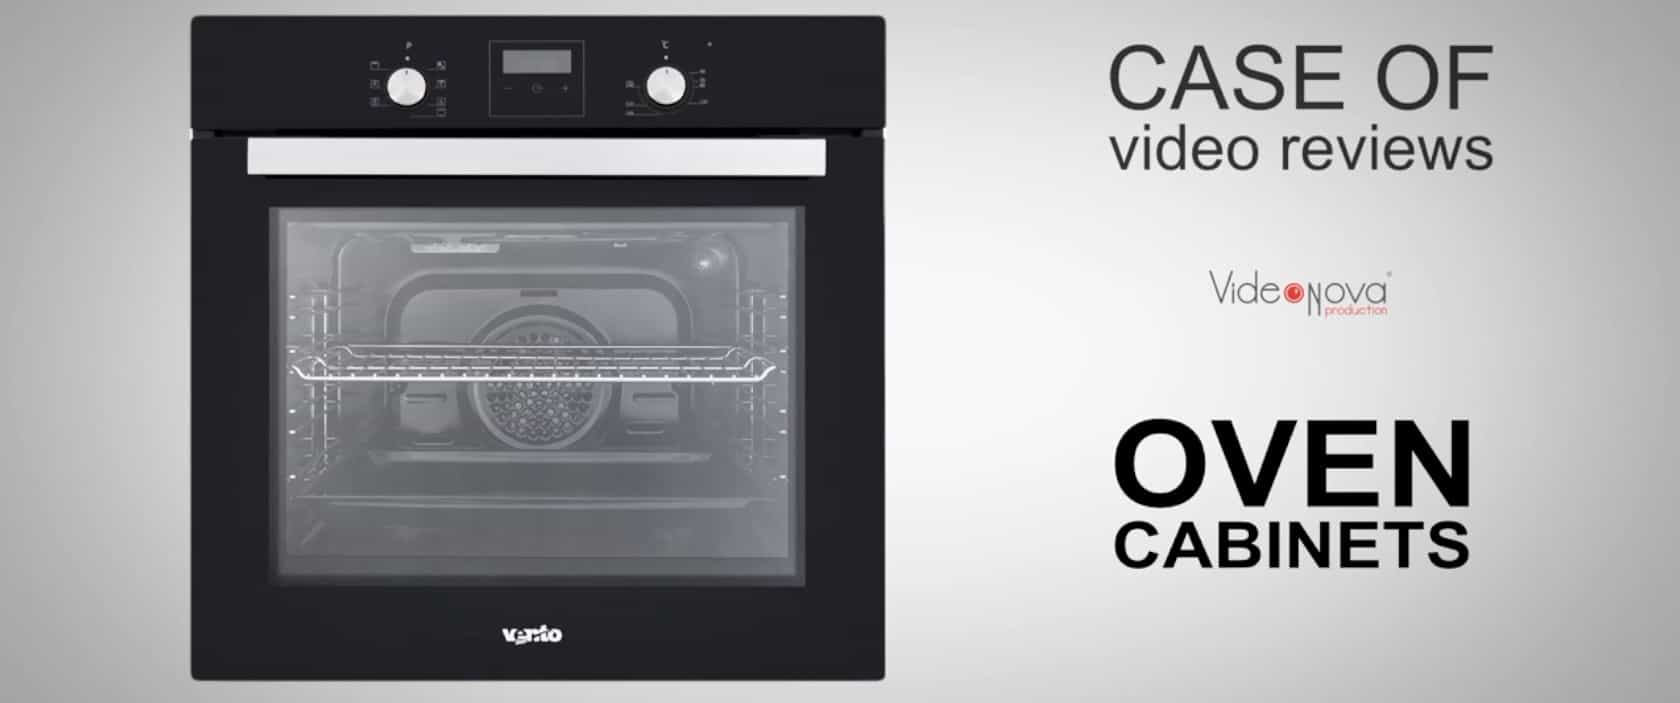 Case video review of large household appliances" Ovens. Case"